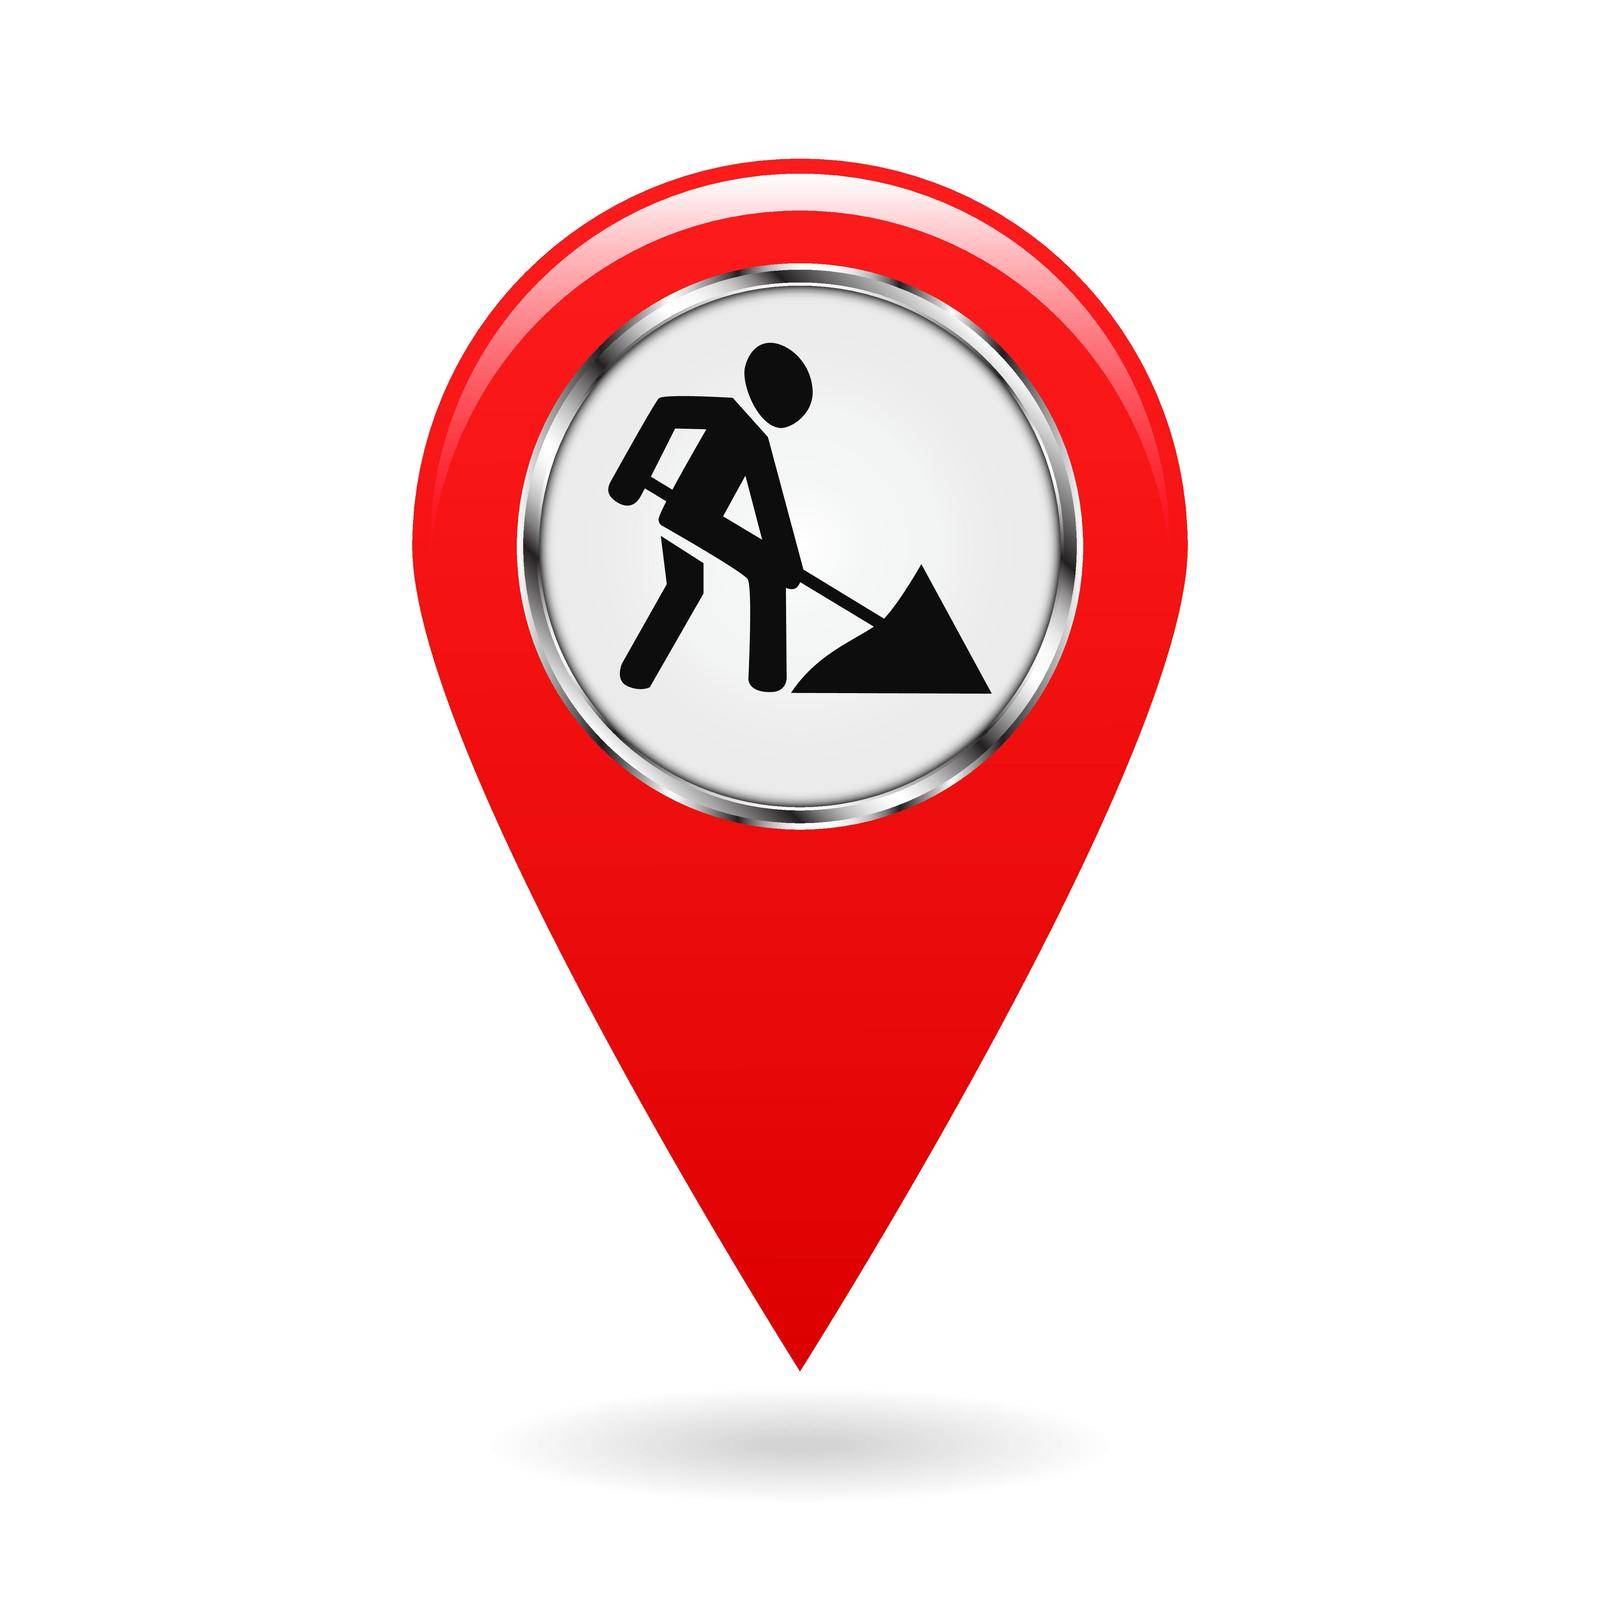 Map pointer. Indicator of repairs and emergency areas on the map terrain. safety symbol. Red object on white background. Vector illustration.